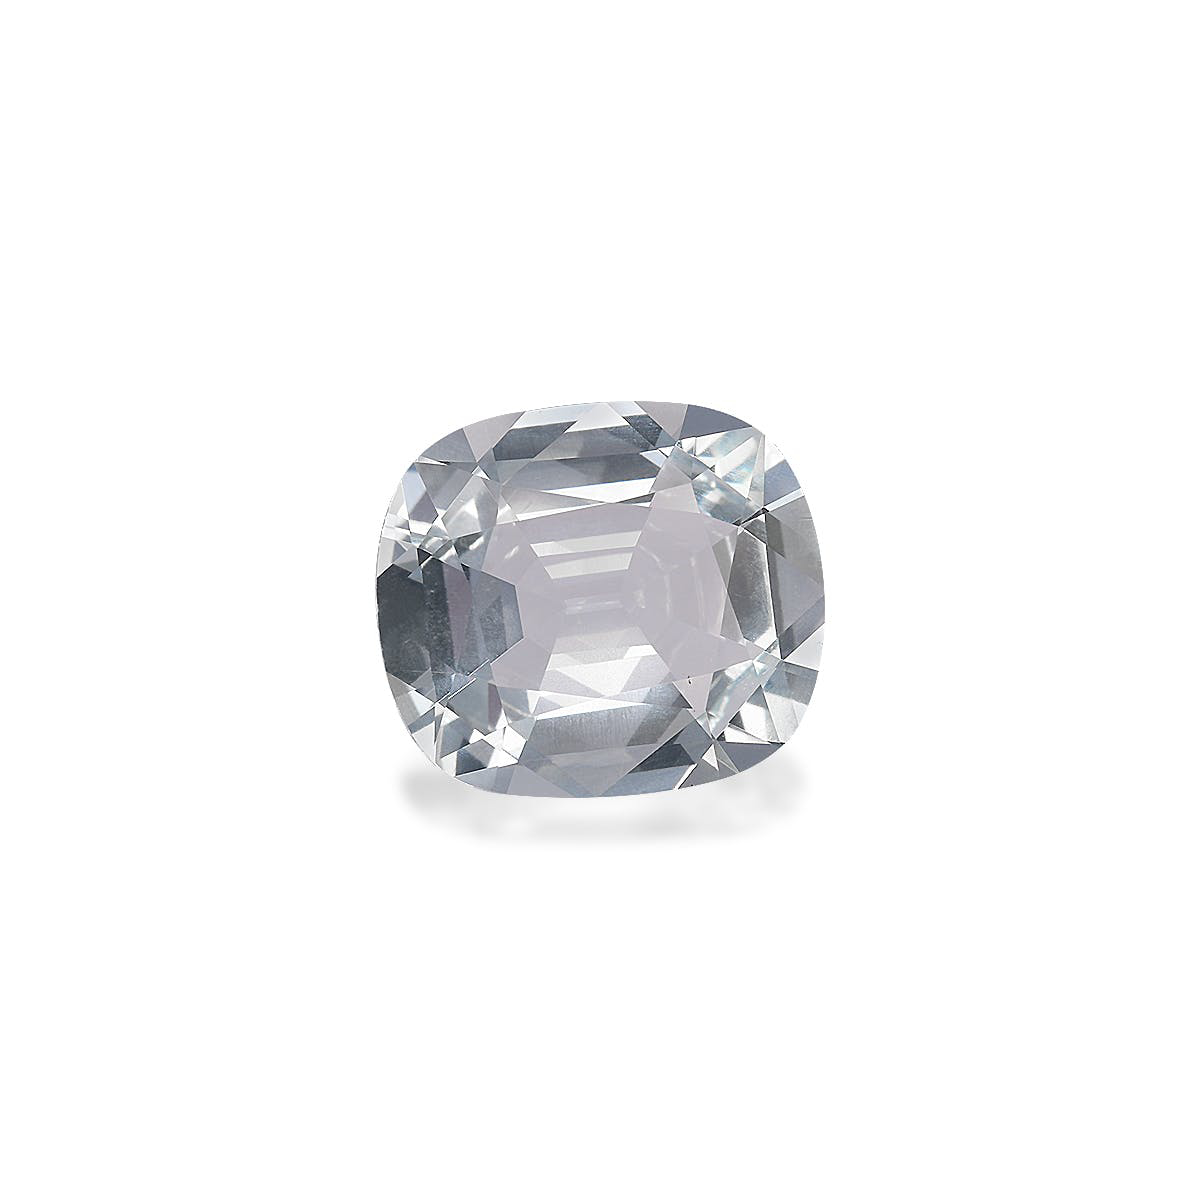 Picture of Frost White Aquamarine 6.56ct - 14x12mm (AQ2660)